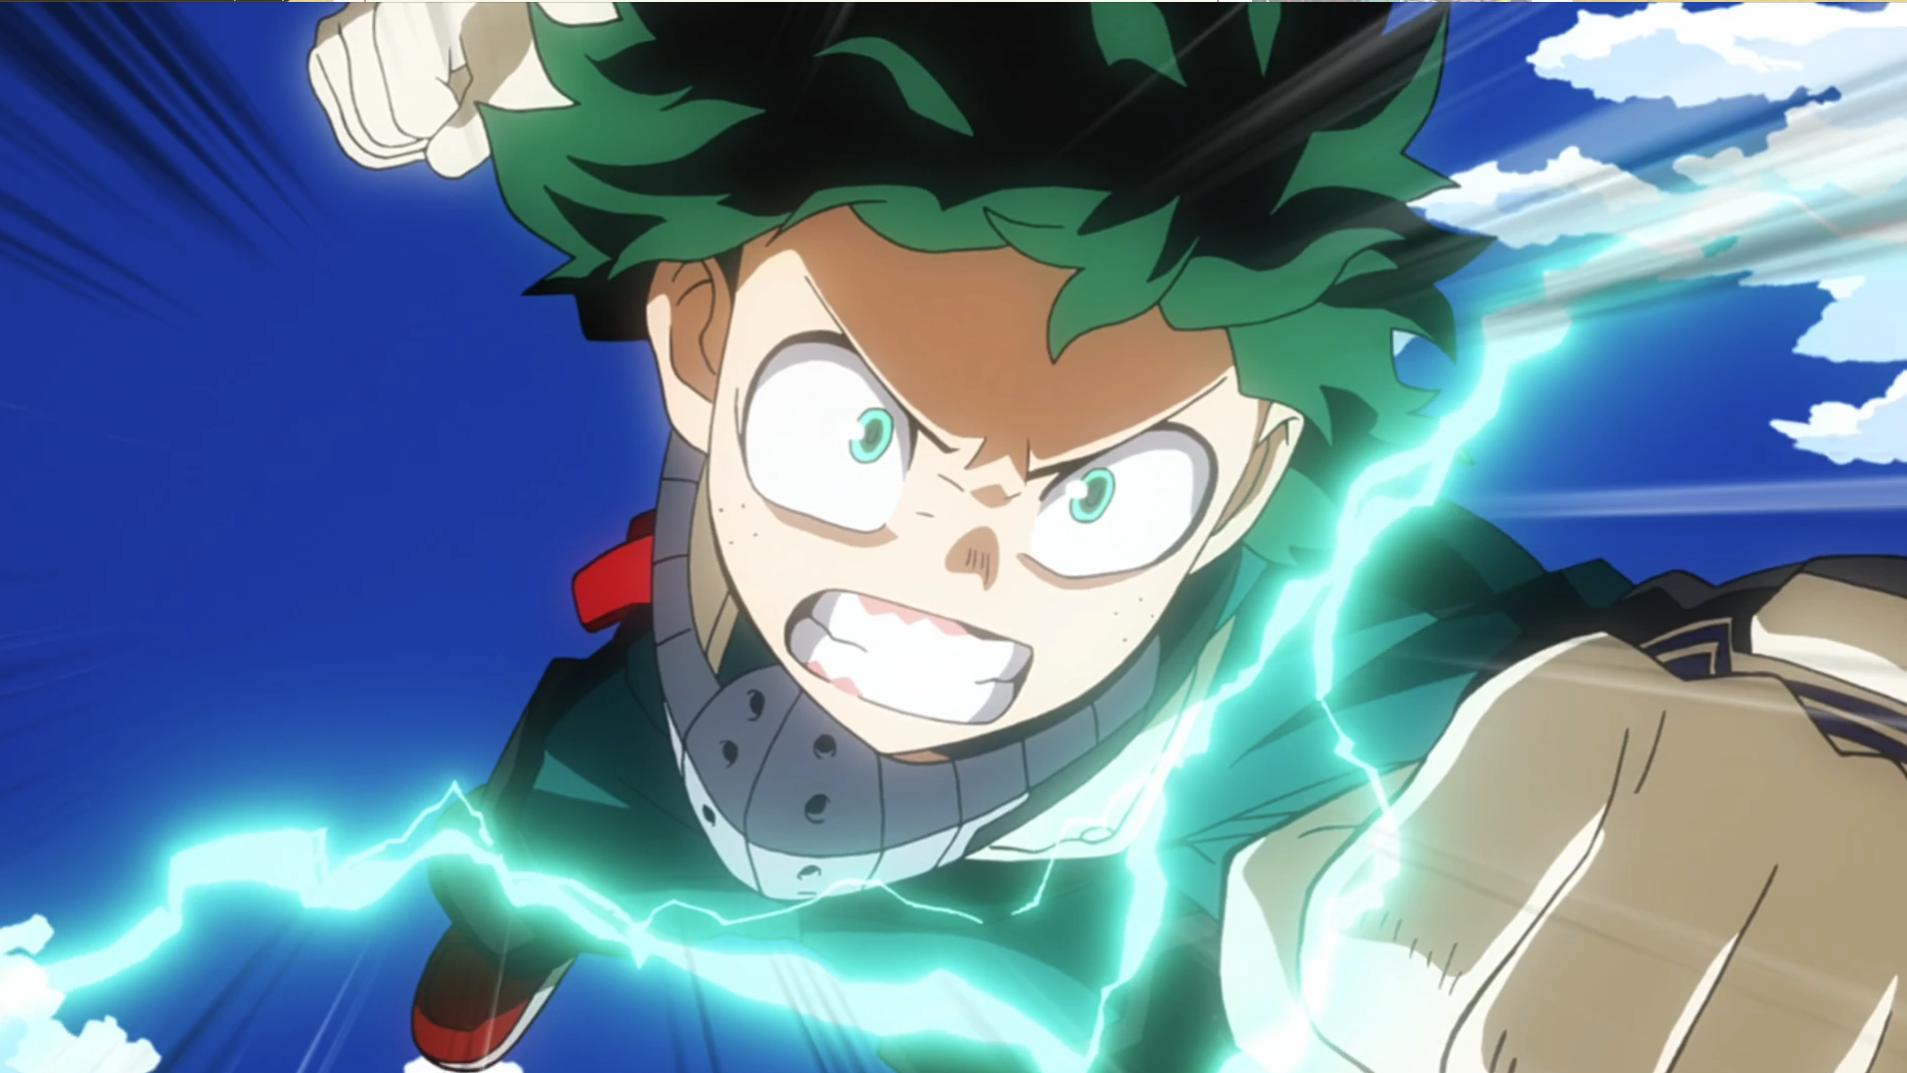 An image of Izuku Midoriya the protagonist of My Hero Acadmia in the anime who will feature in Ultra Rumble.